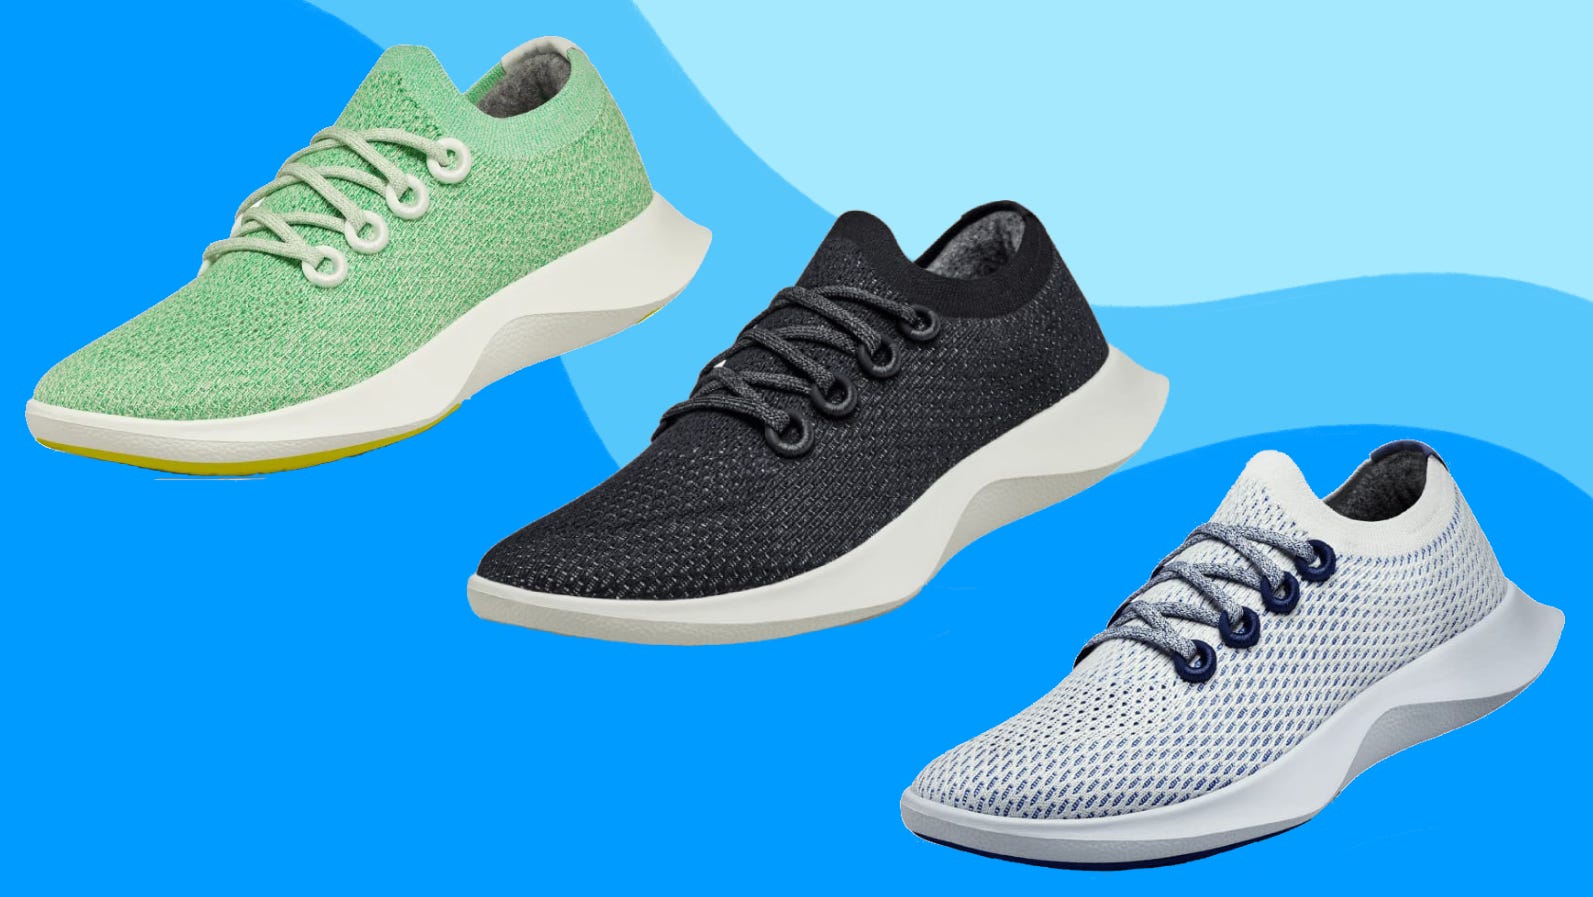 Allbirds sale: Get 20% off Tree Dashers sneakers for men and women